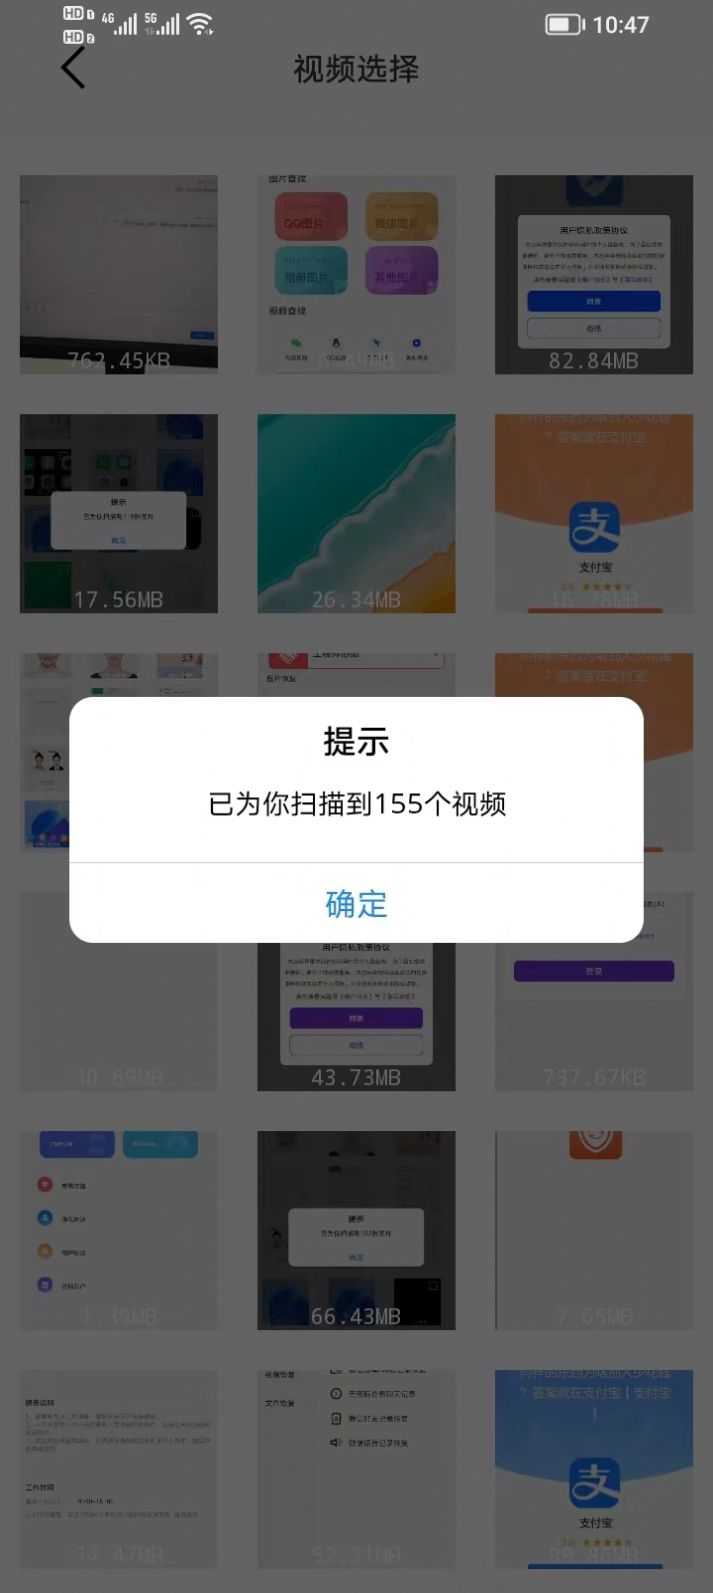 swagger视频app图2